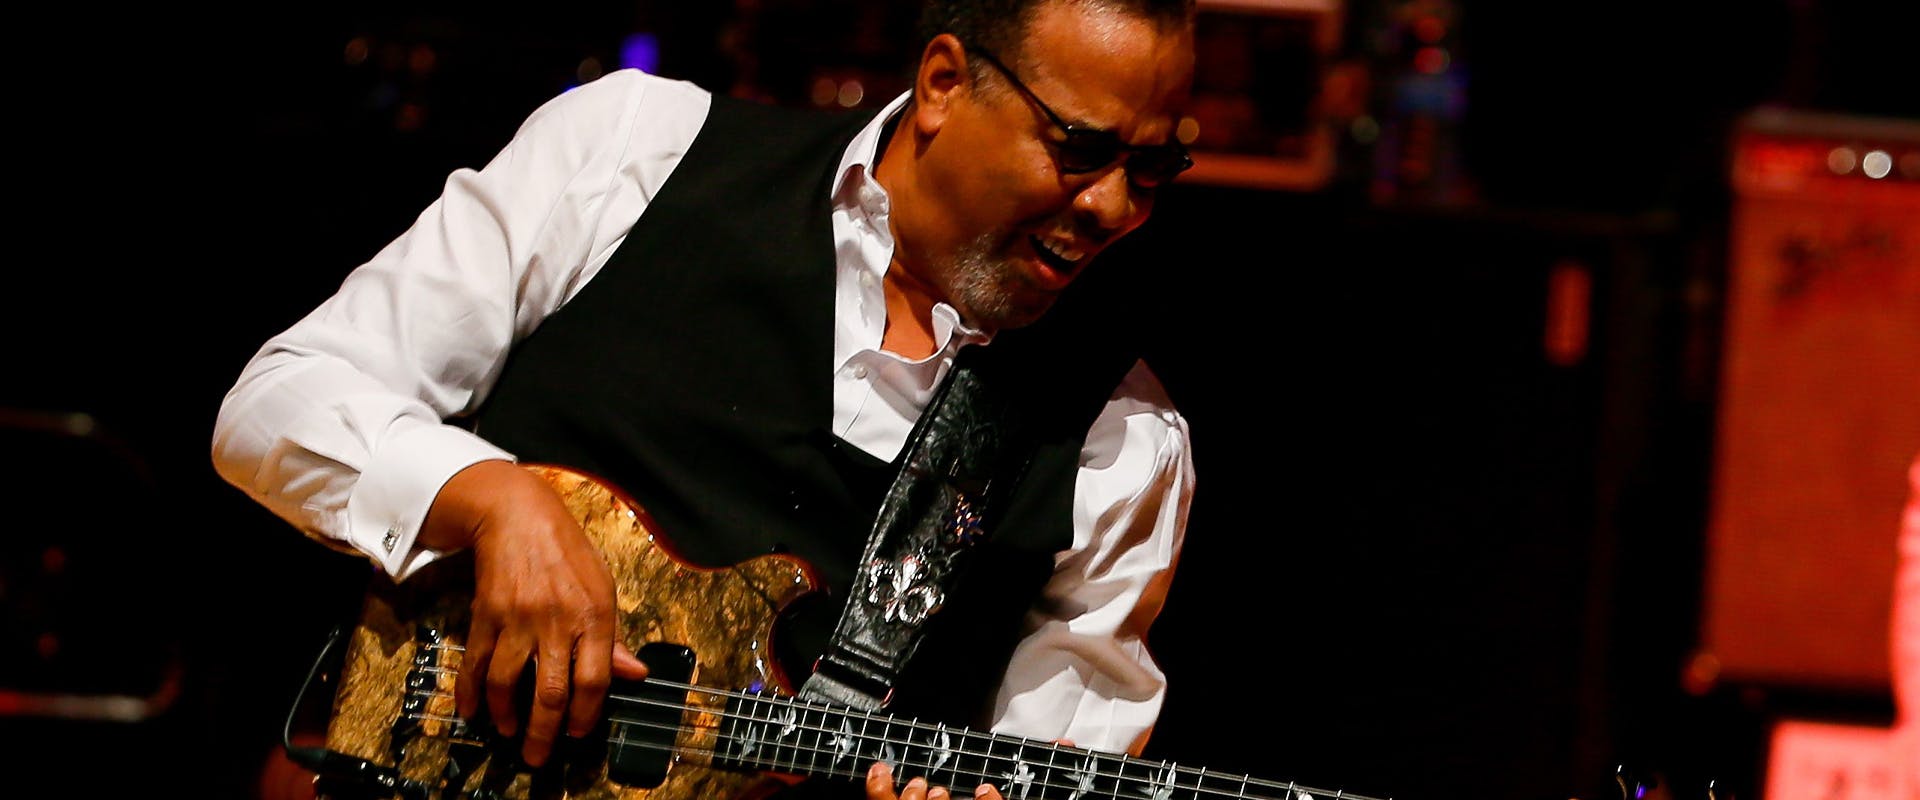 Stanley Clarke performs with his band at AASSM in Izmir, Turkey on October 15, 2019. (Photo by Evren Atalay/Anadolu Agency via Getty Images)